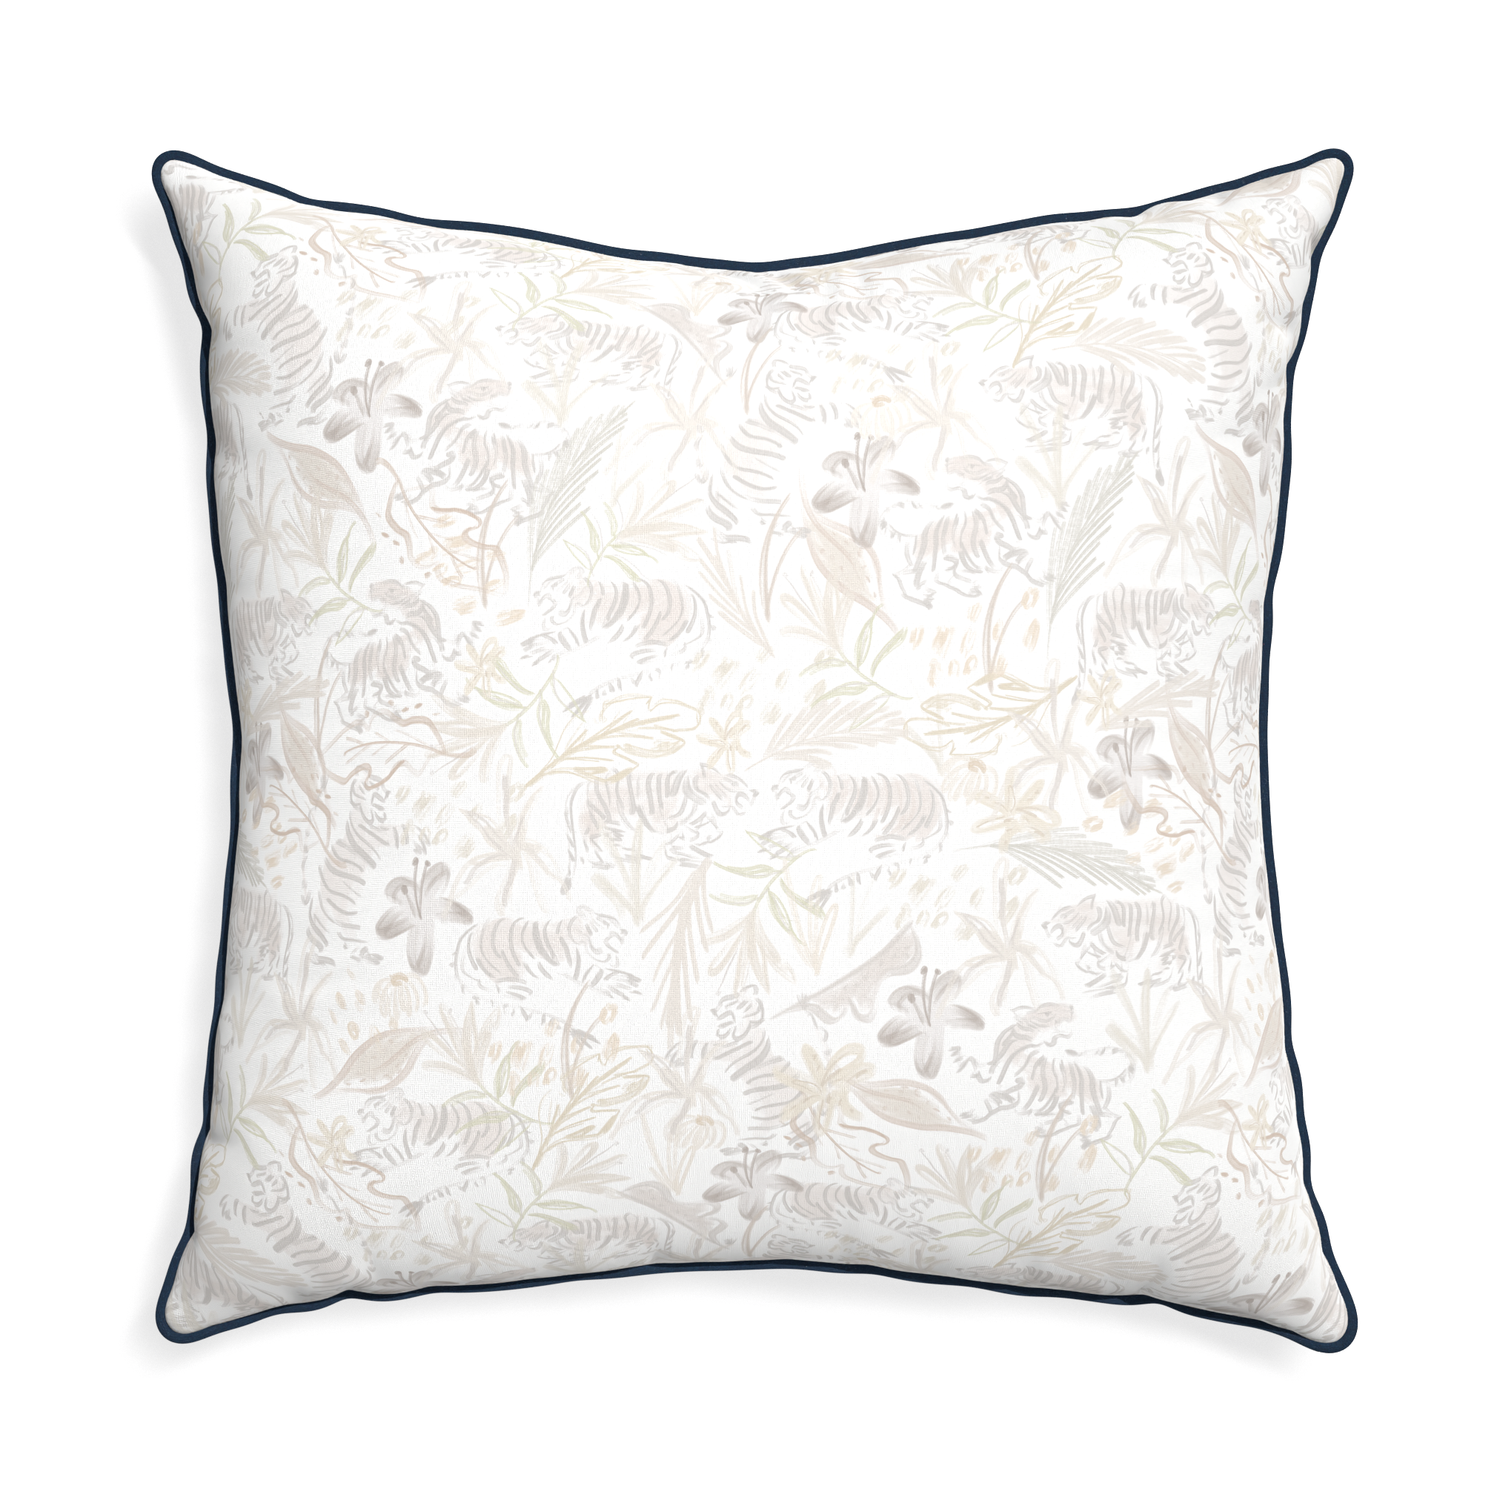 Euro-sham frida sand custom beige chinoiserie tigerpillow with c piping on white background